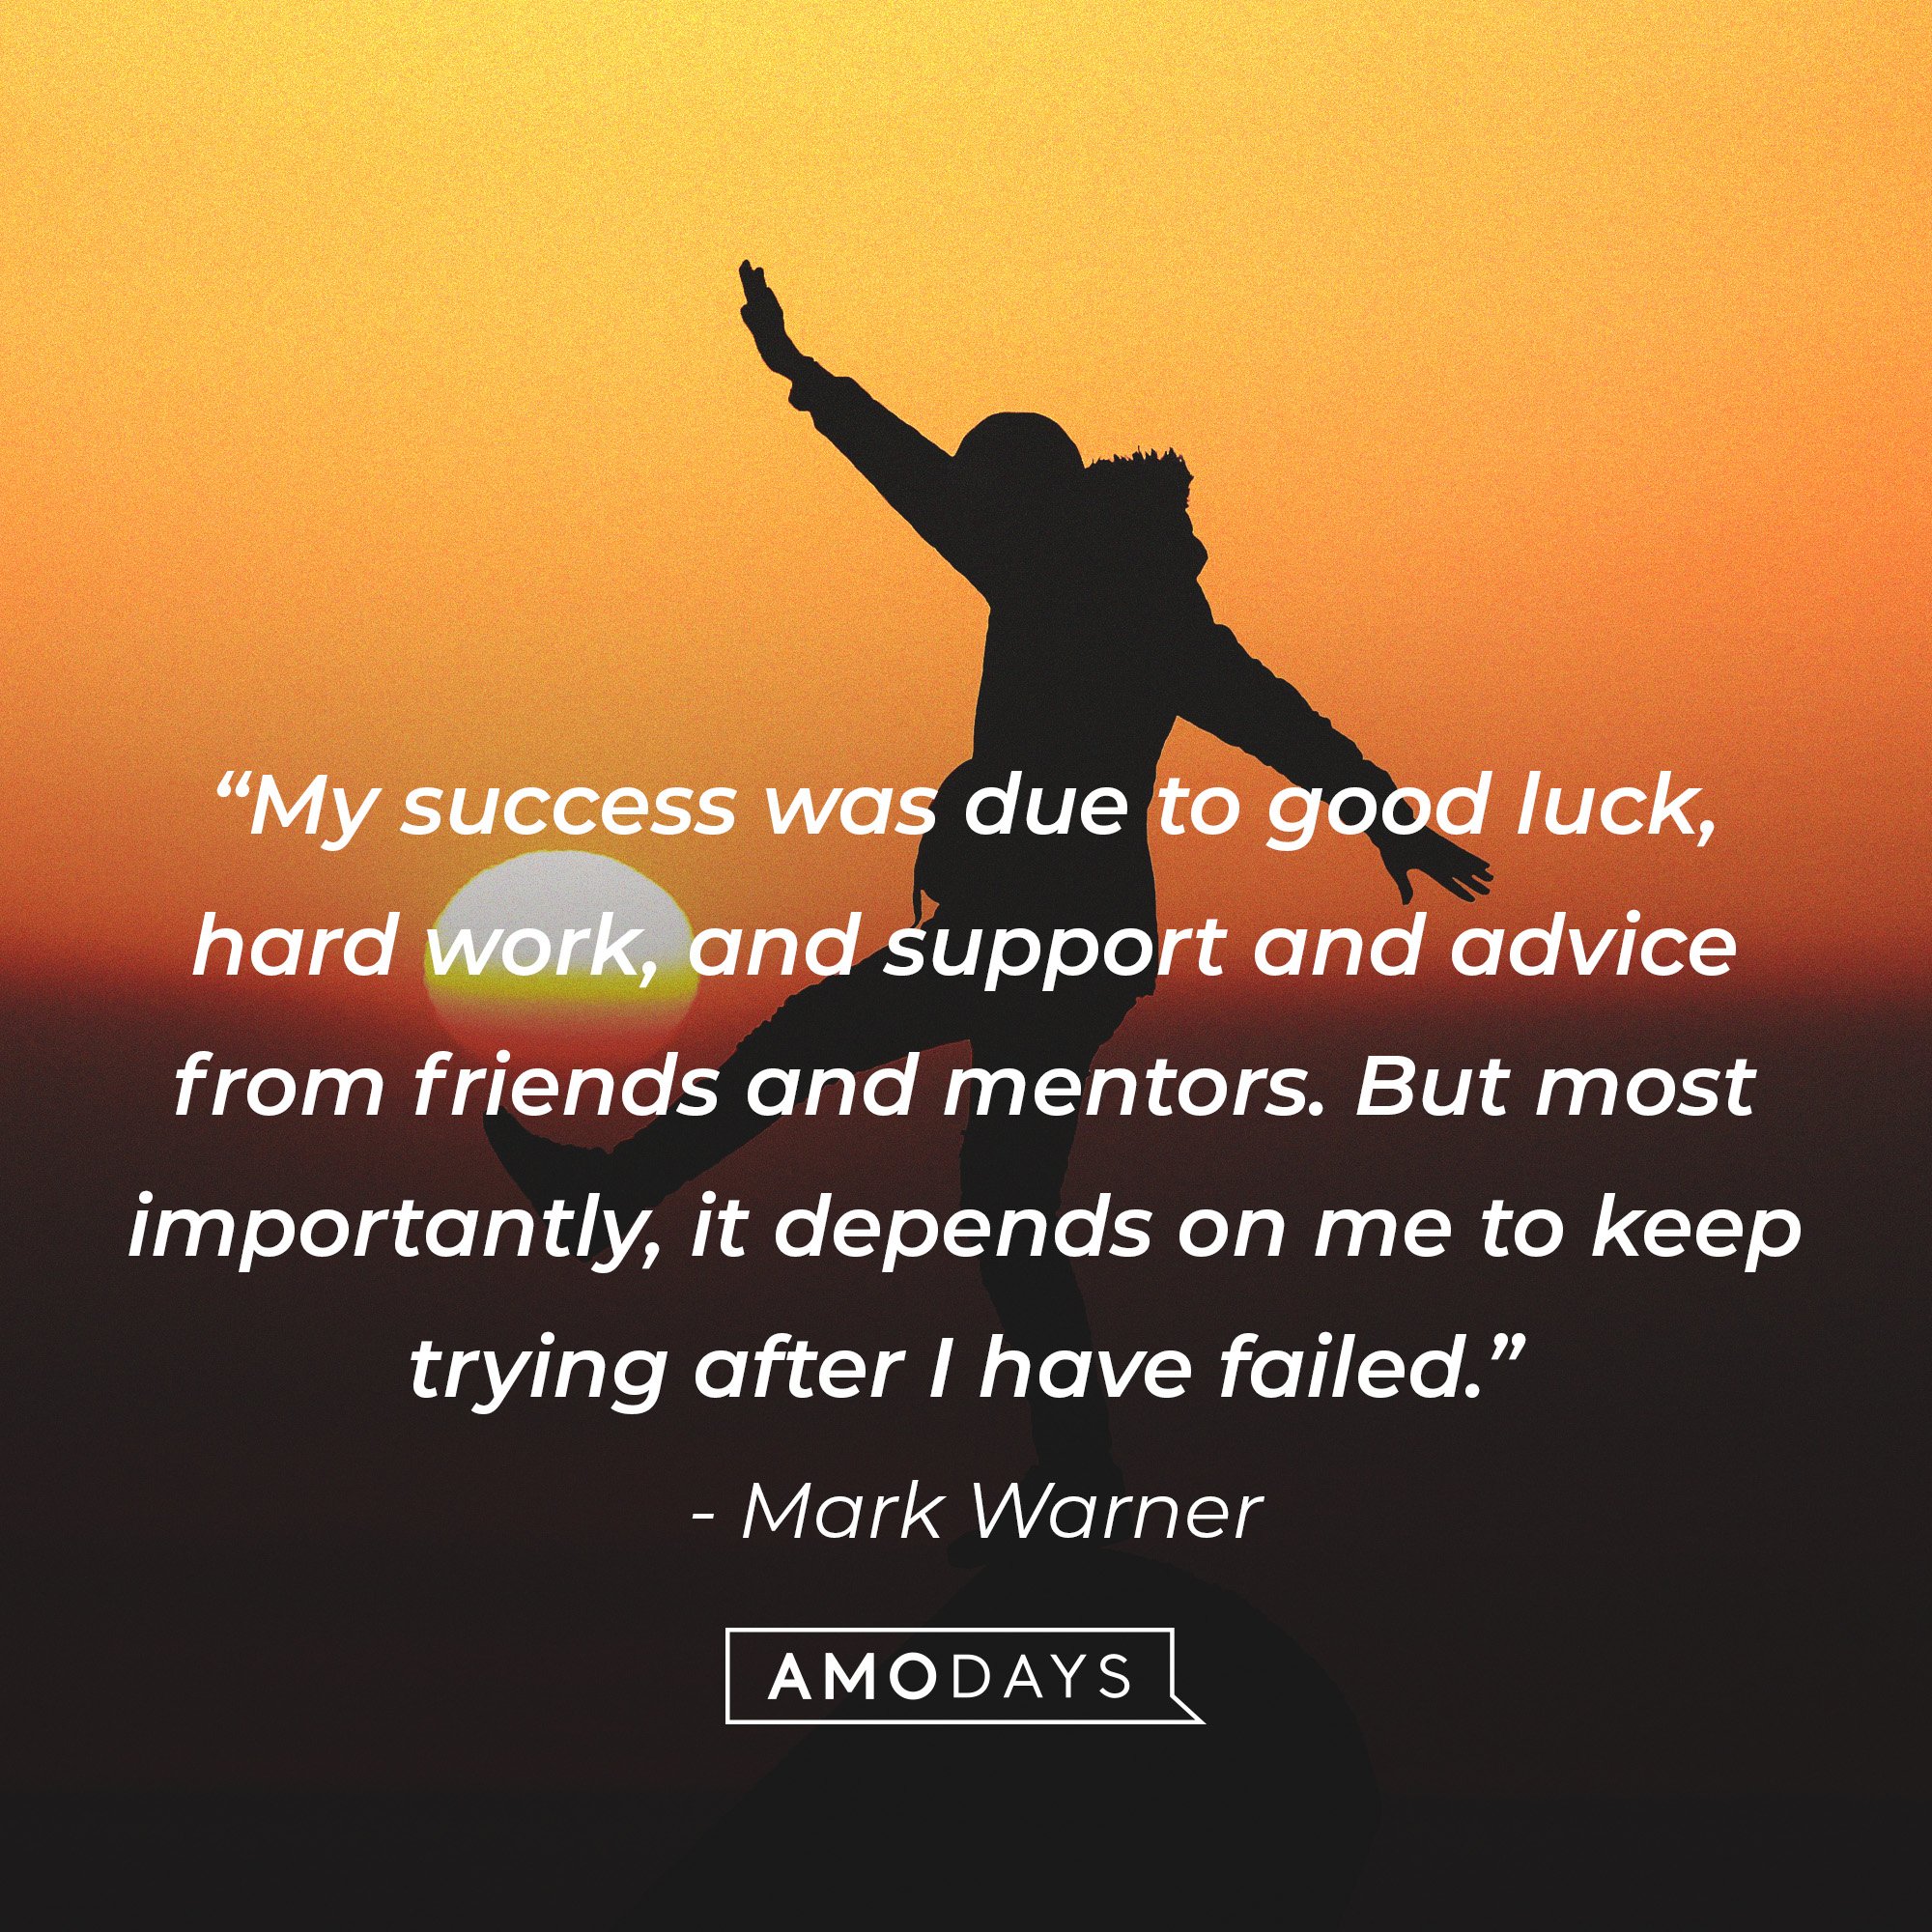 Mark Warner's quote: “My success was due to good luck, hard work, and support and advice from friends and mentors. But most importantly, it depends on me to keep trying after I have failed.” | Image: AmoDays